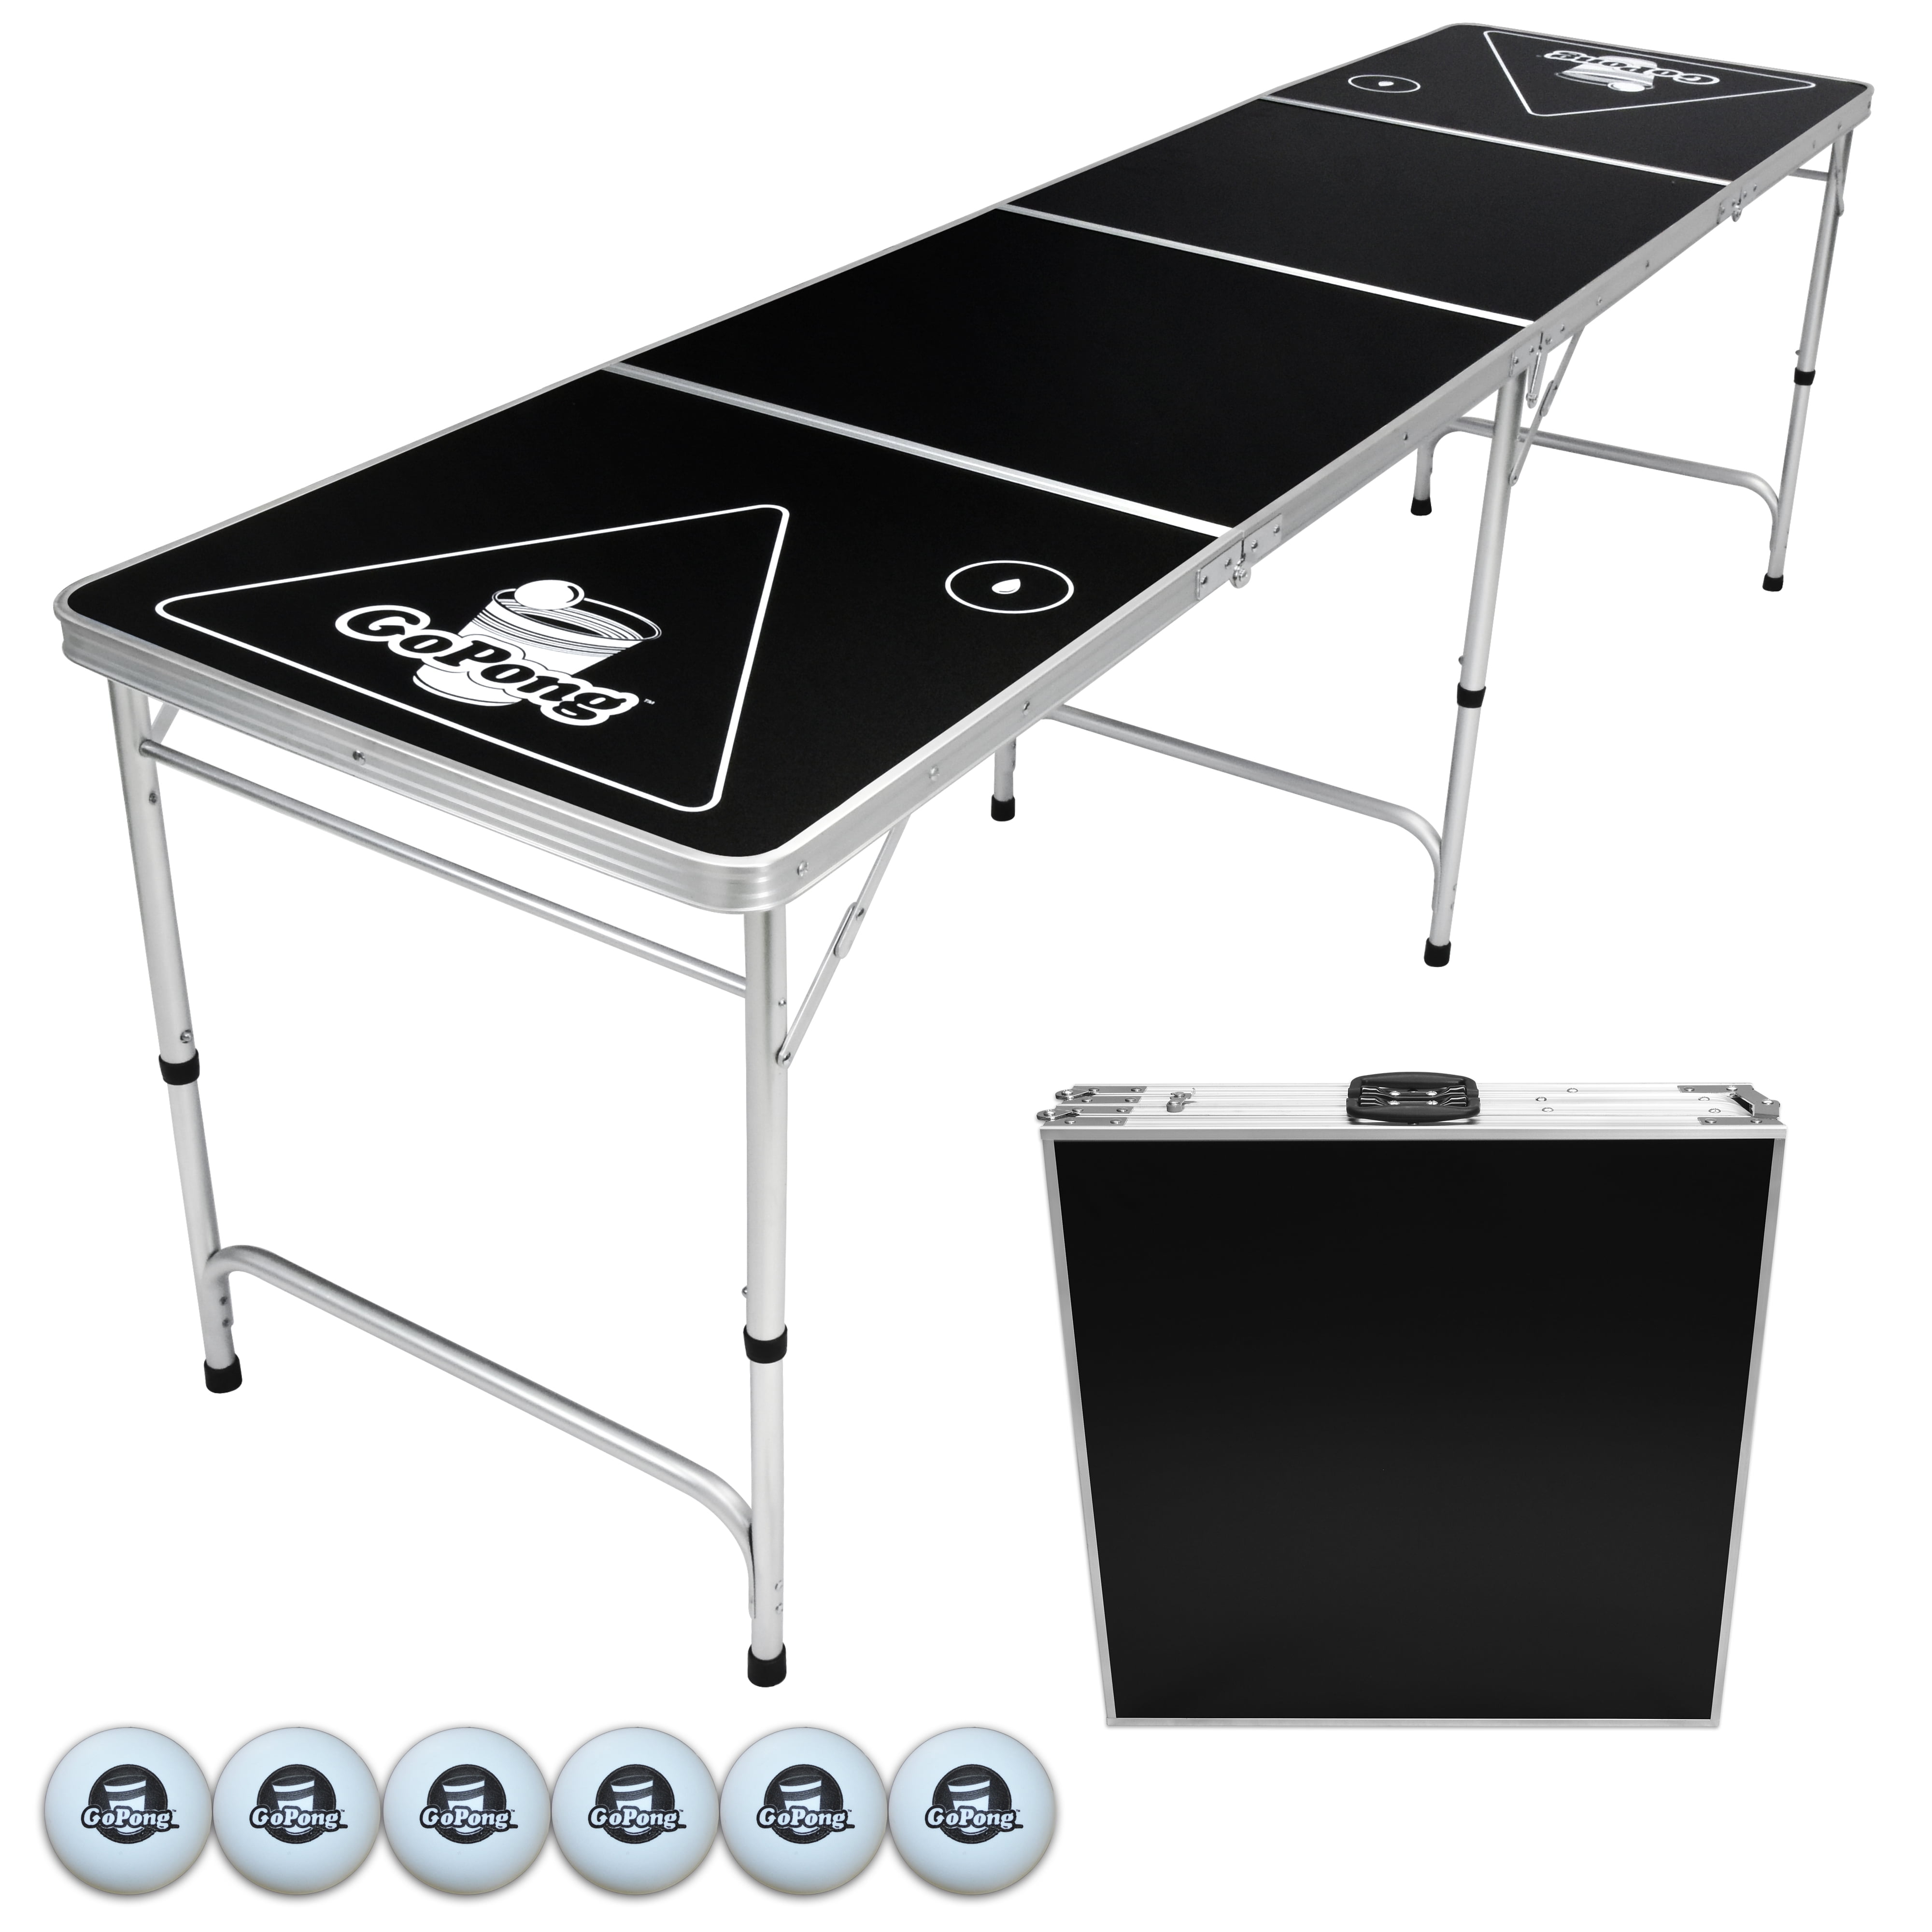 Beer Pong Tables - Official (Portable) Dimensions & Drawings